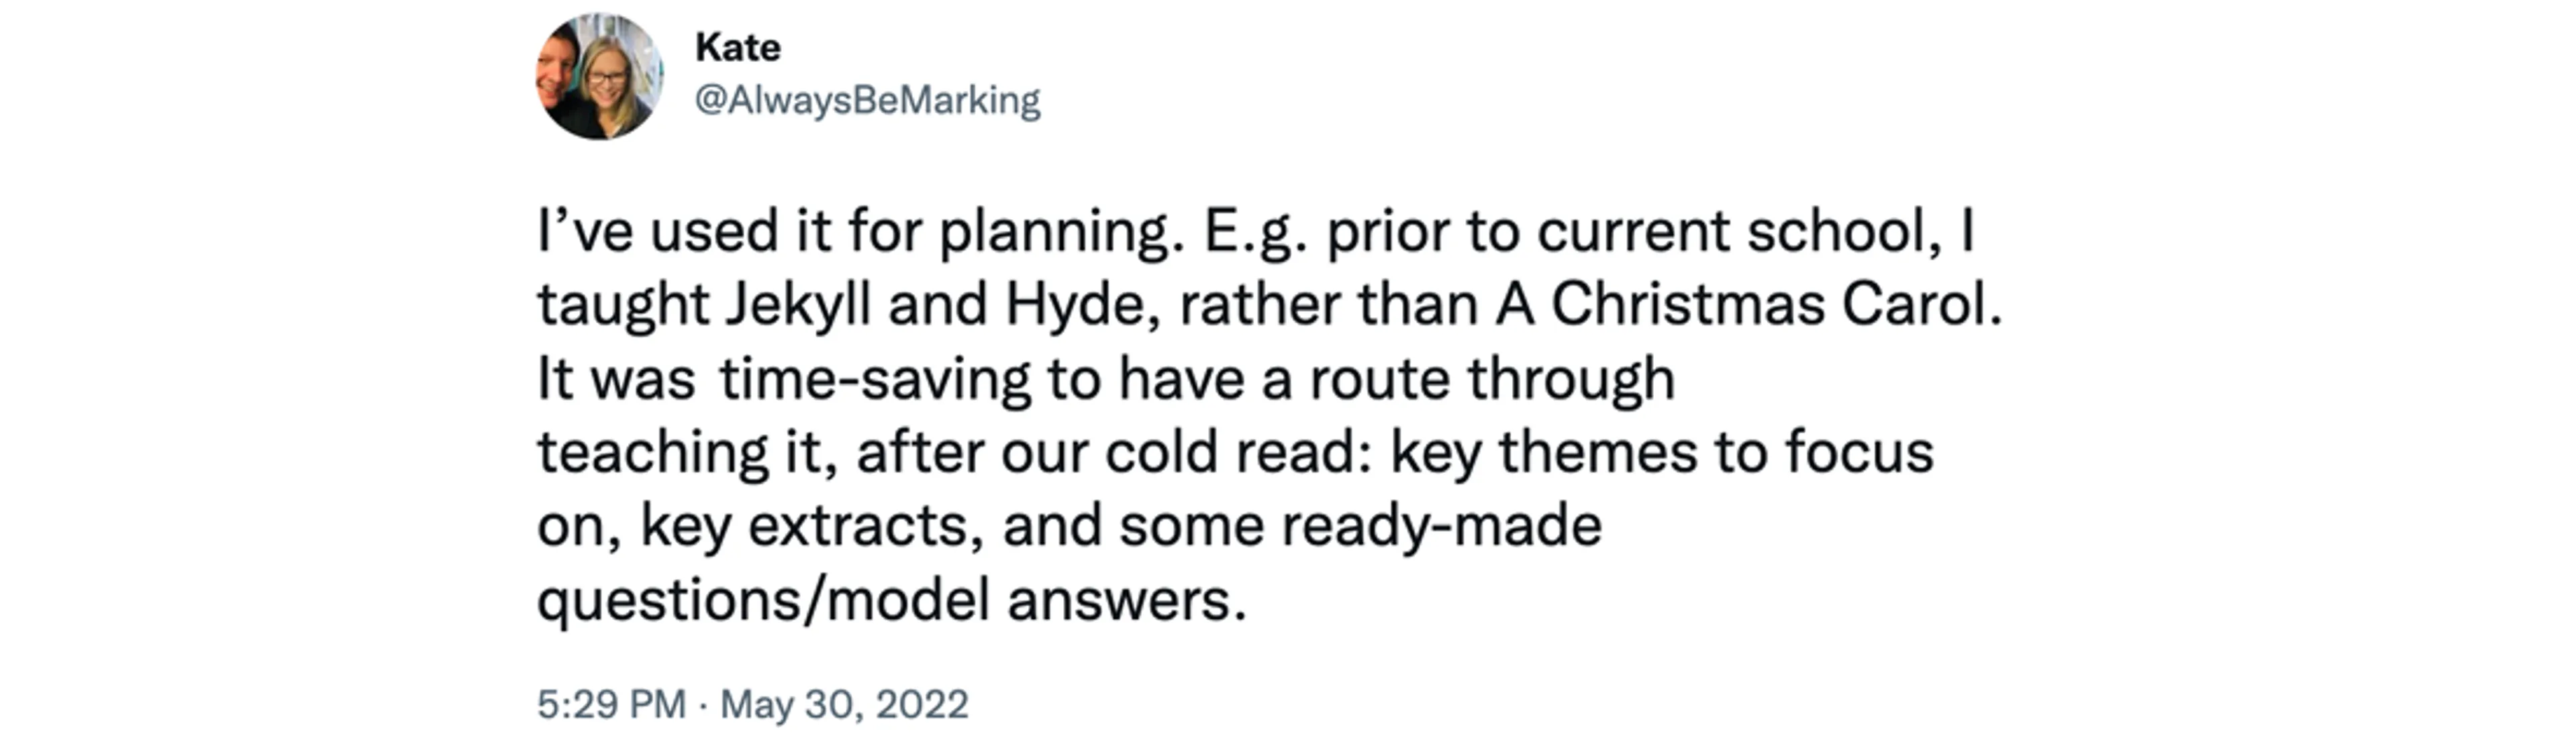 Screenshot of tweet from @AlwaysBeMarking at 5:29pm, May 30 2022, saying "I’ve used it for planning. E.g. prior to current school, I taught Jekyll and Hyde, rather than A Christmas Carol. It was and time-saving to have a route through teaching it, after our cold read: key themes to focus on, key extracts, and some ready-made questions/model answers."